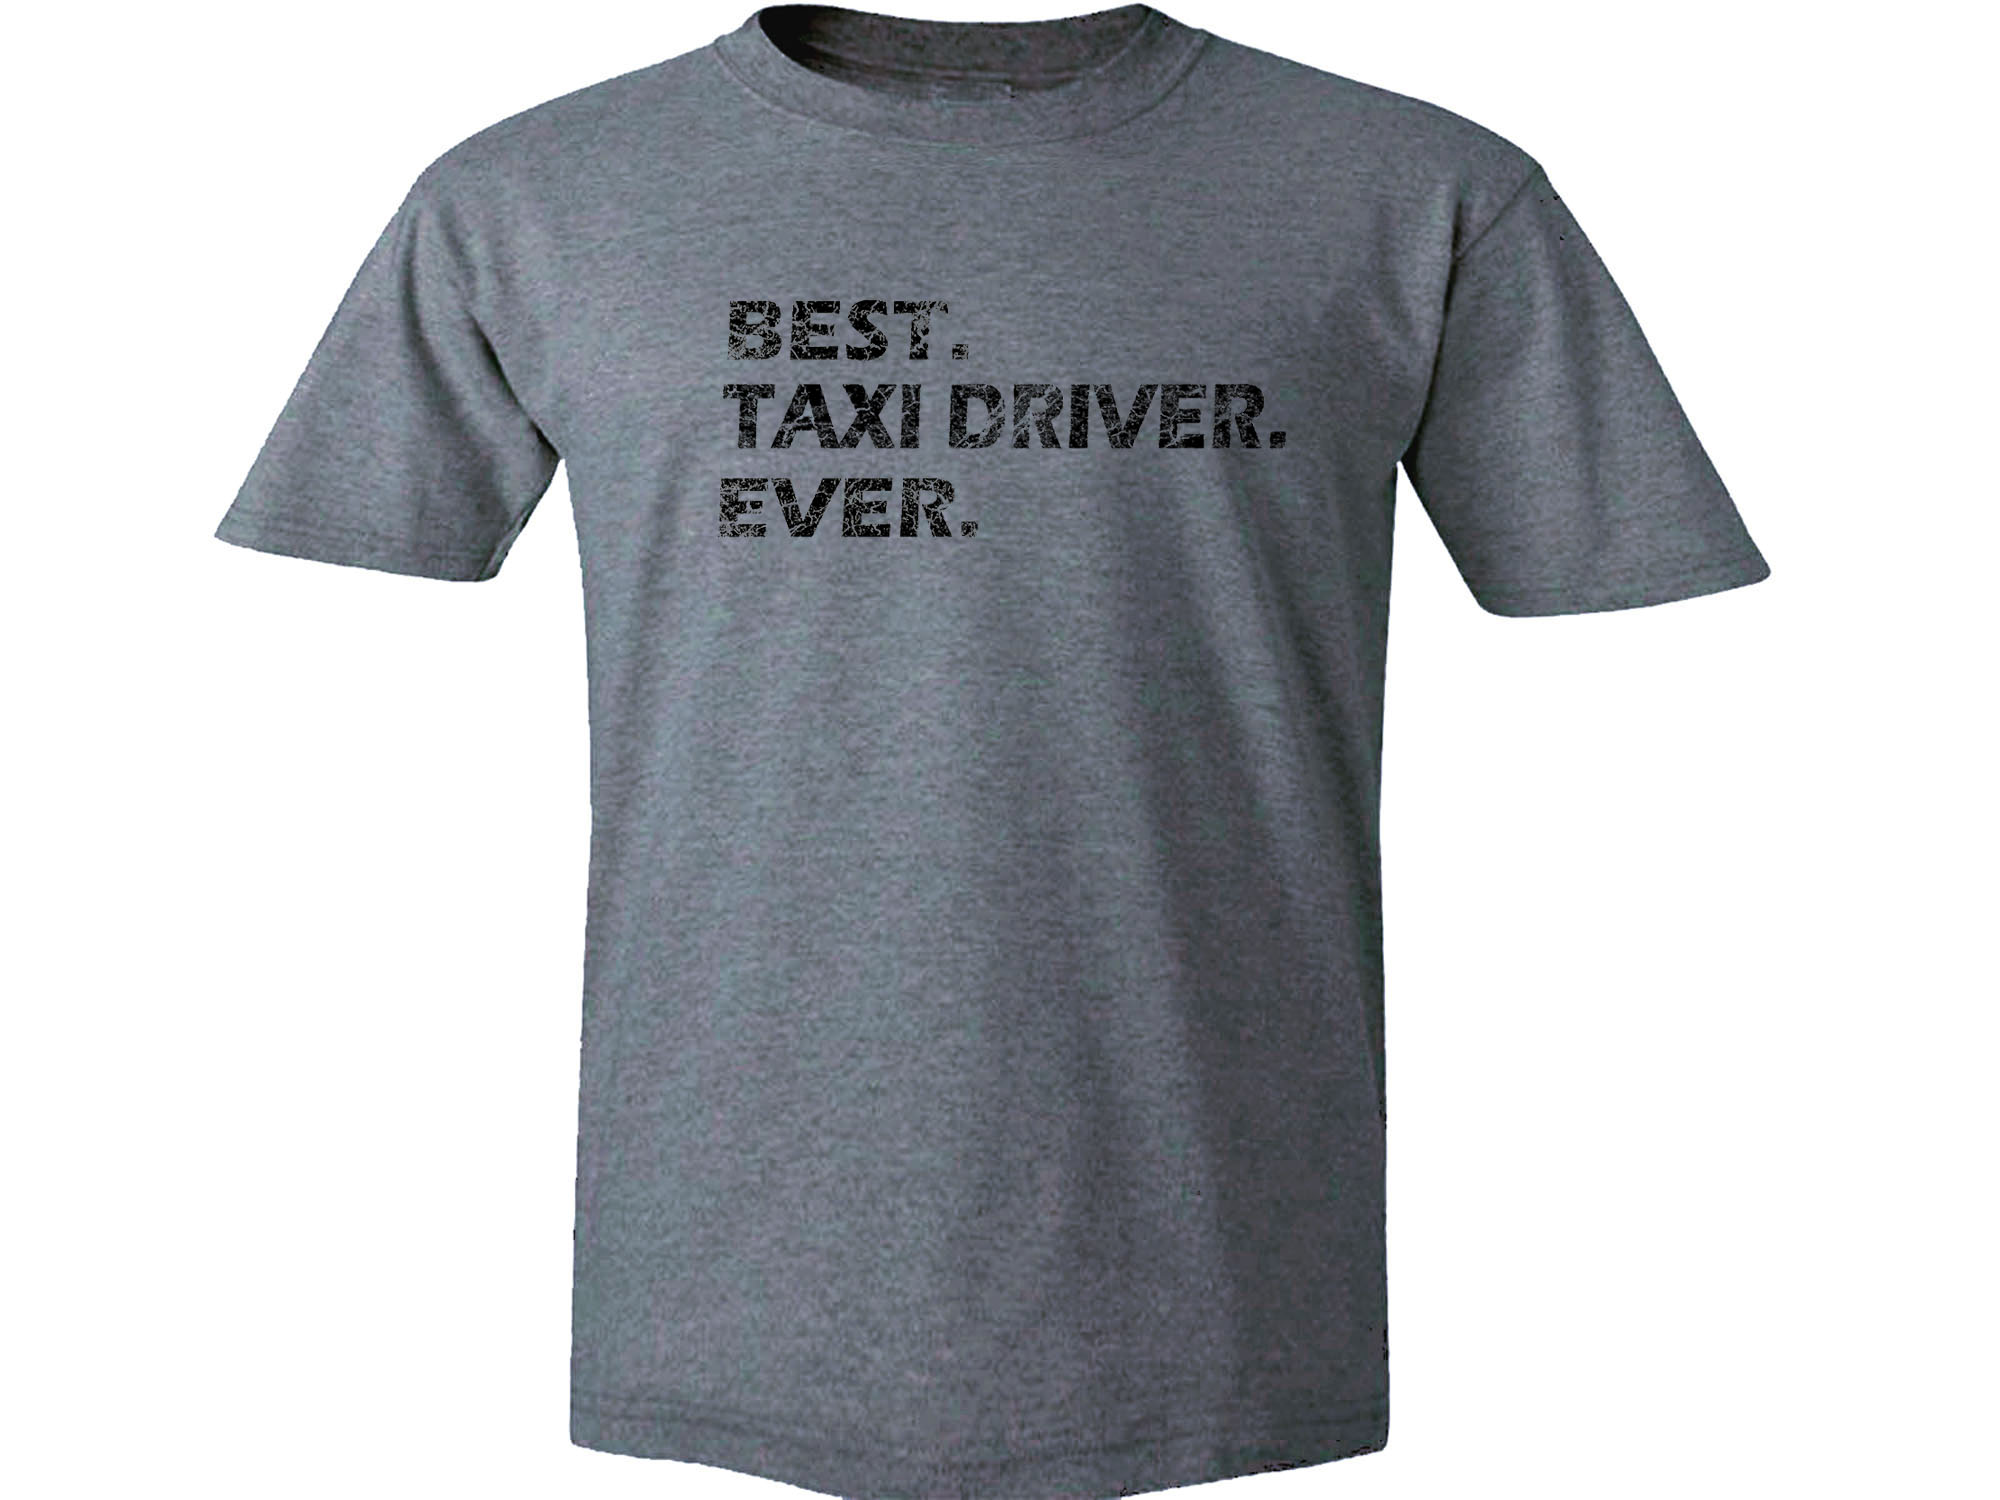 Best taxi driver ever distressed print gray t-shirt